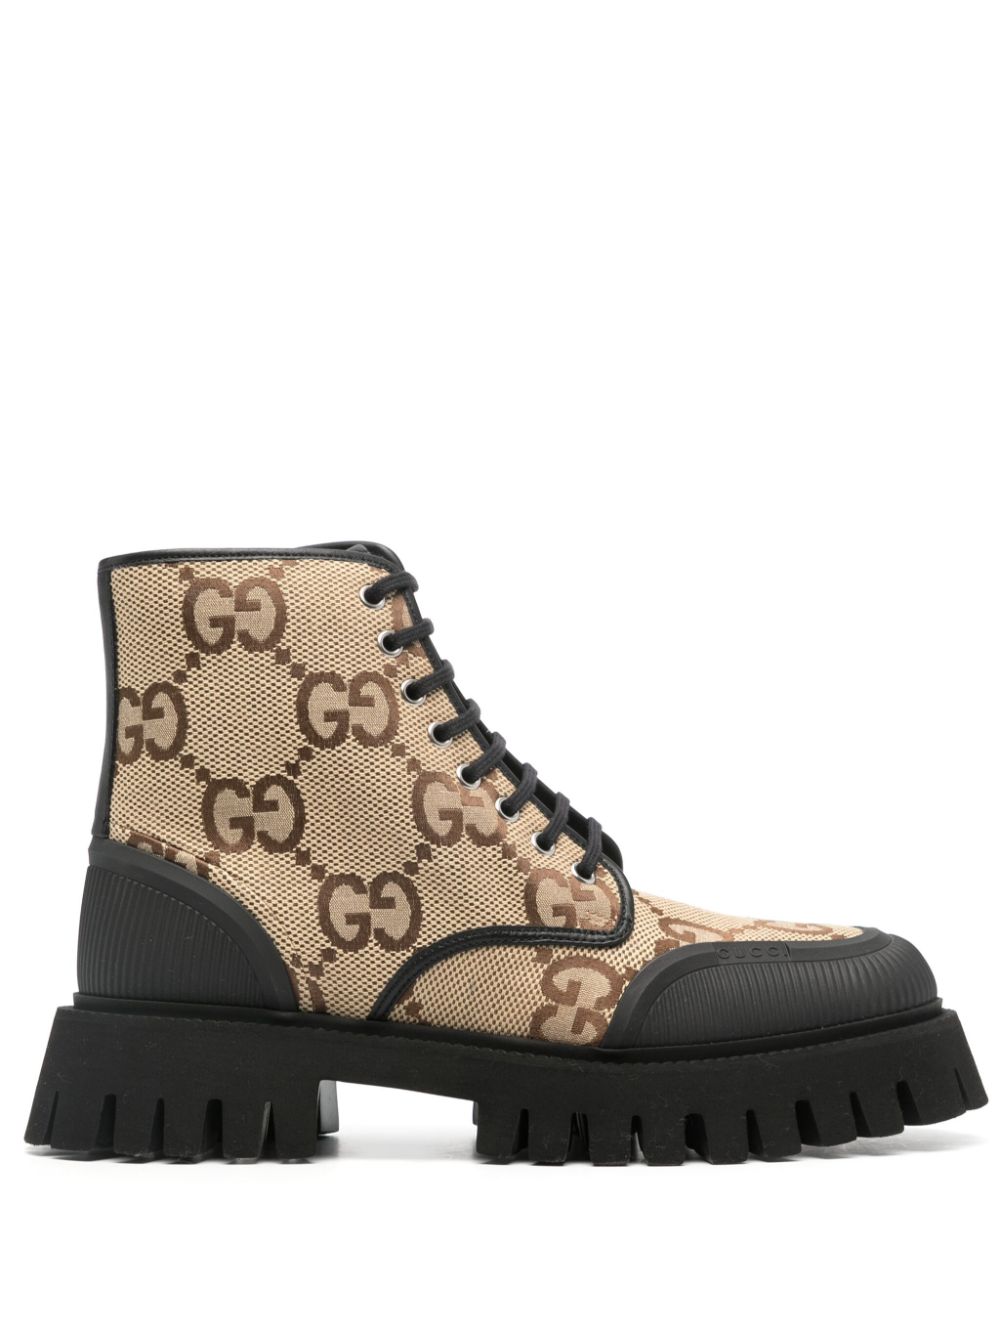 GG lace-up combat boots